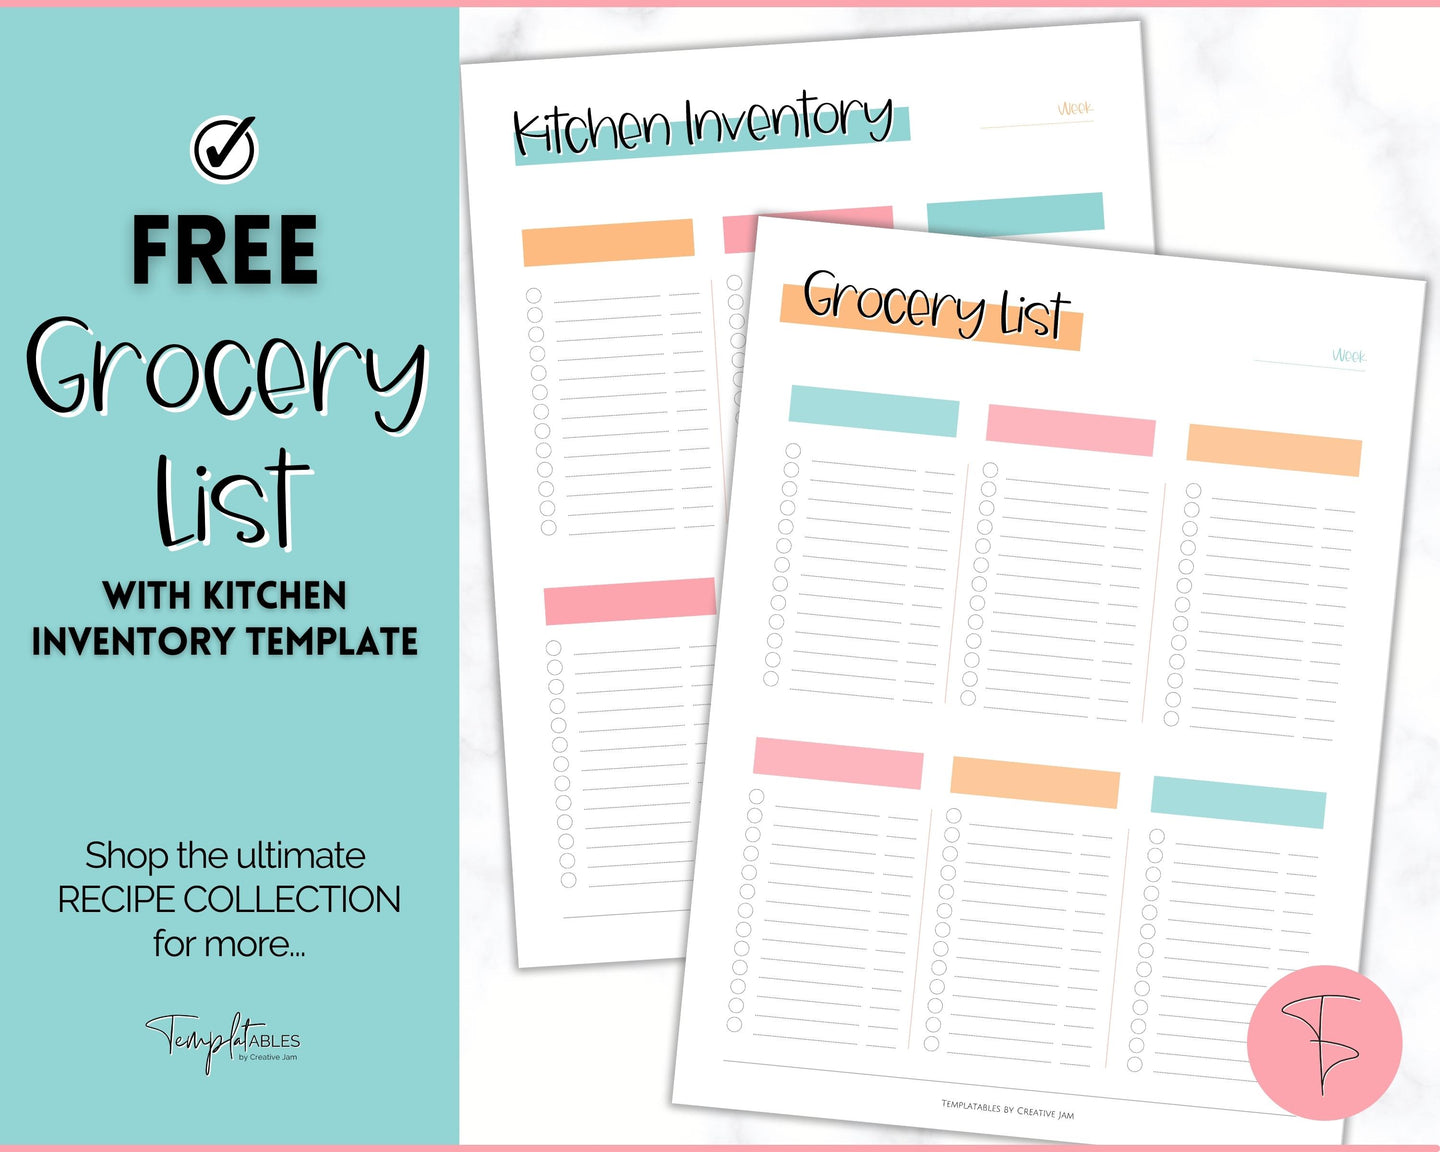 FREE - Grocery List Printable, Weekly Shopping List, Meal Planner Checklist, Kitchen Organization Template | Colorful Sky